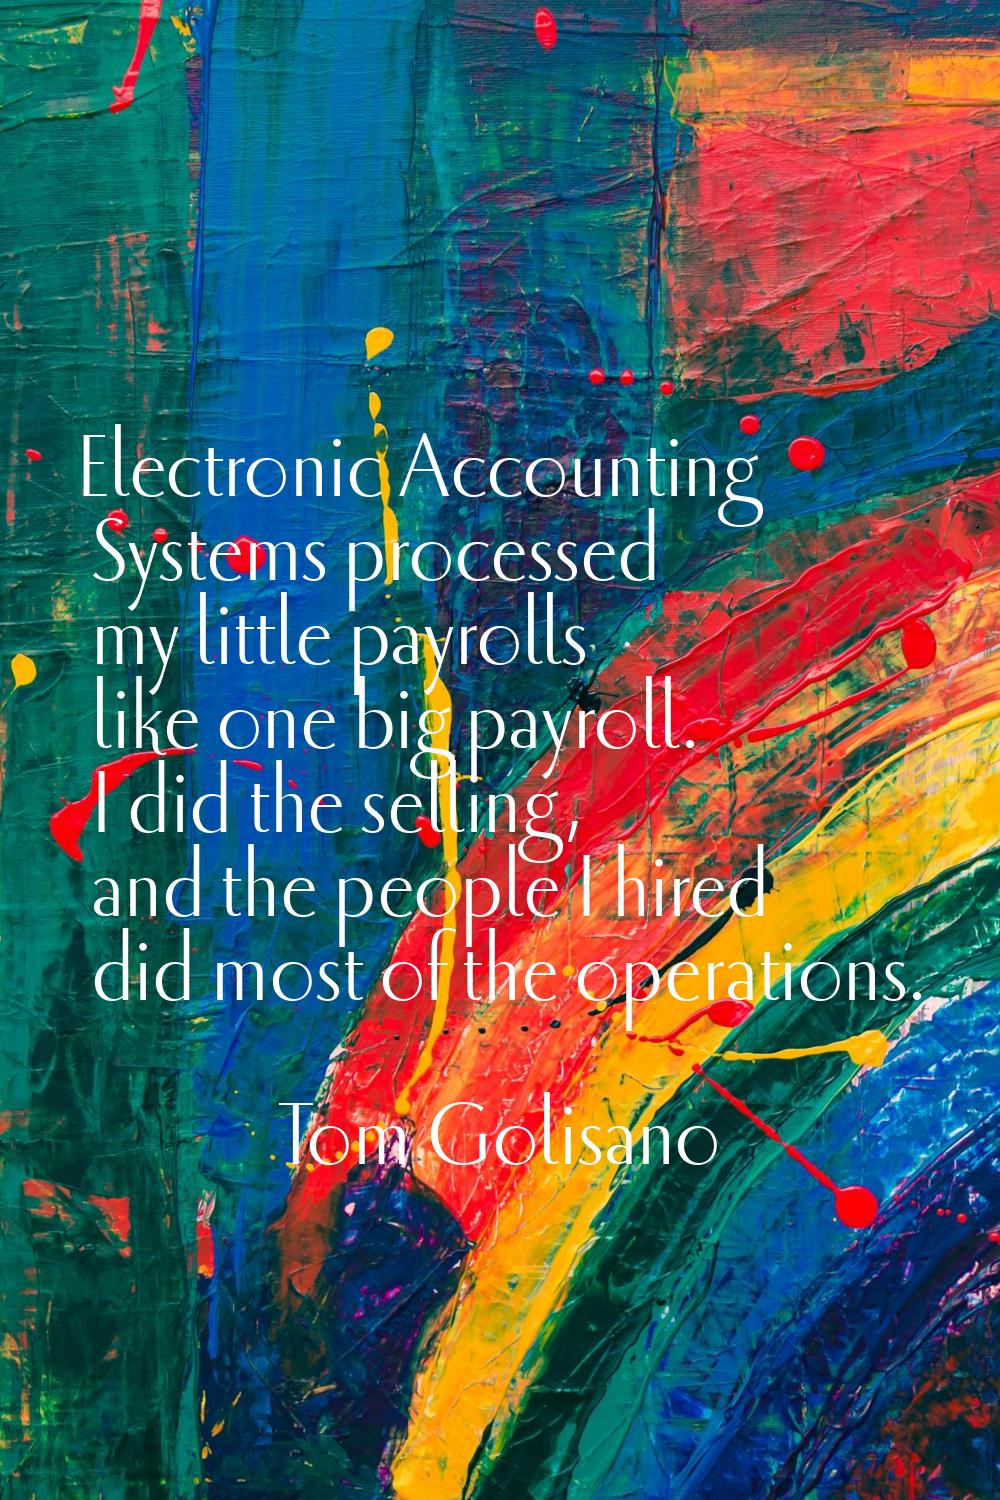 Electronic Accounting Systems processed my little payrolls like one big payroll. I did the selling,